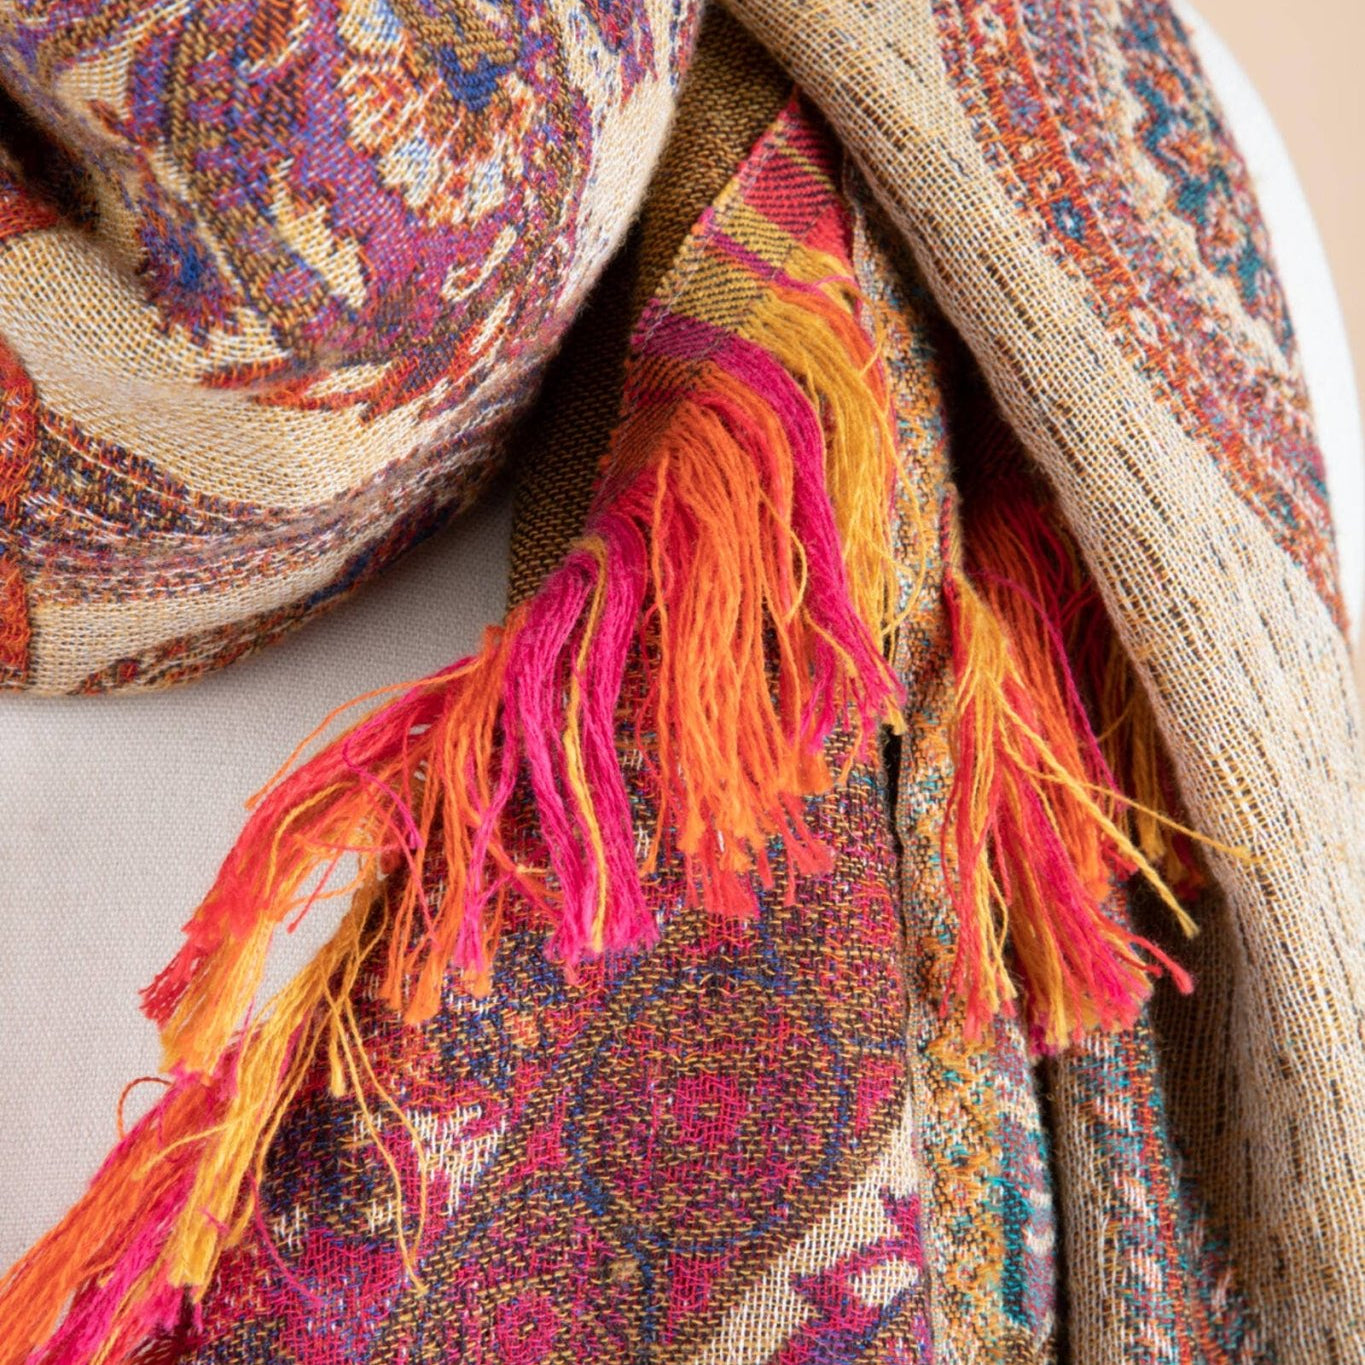 Jacquard Mixed Floral Paisley Fringed ScarfSAACHIScarves